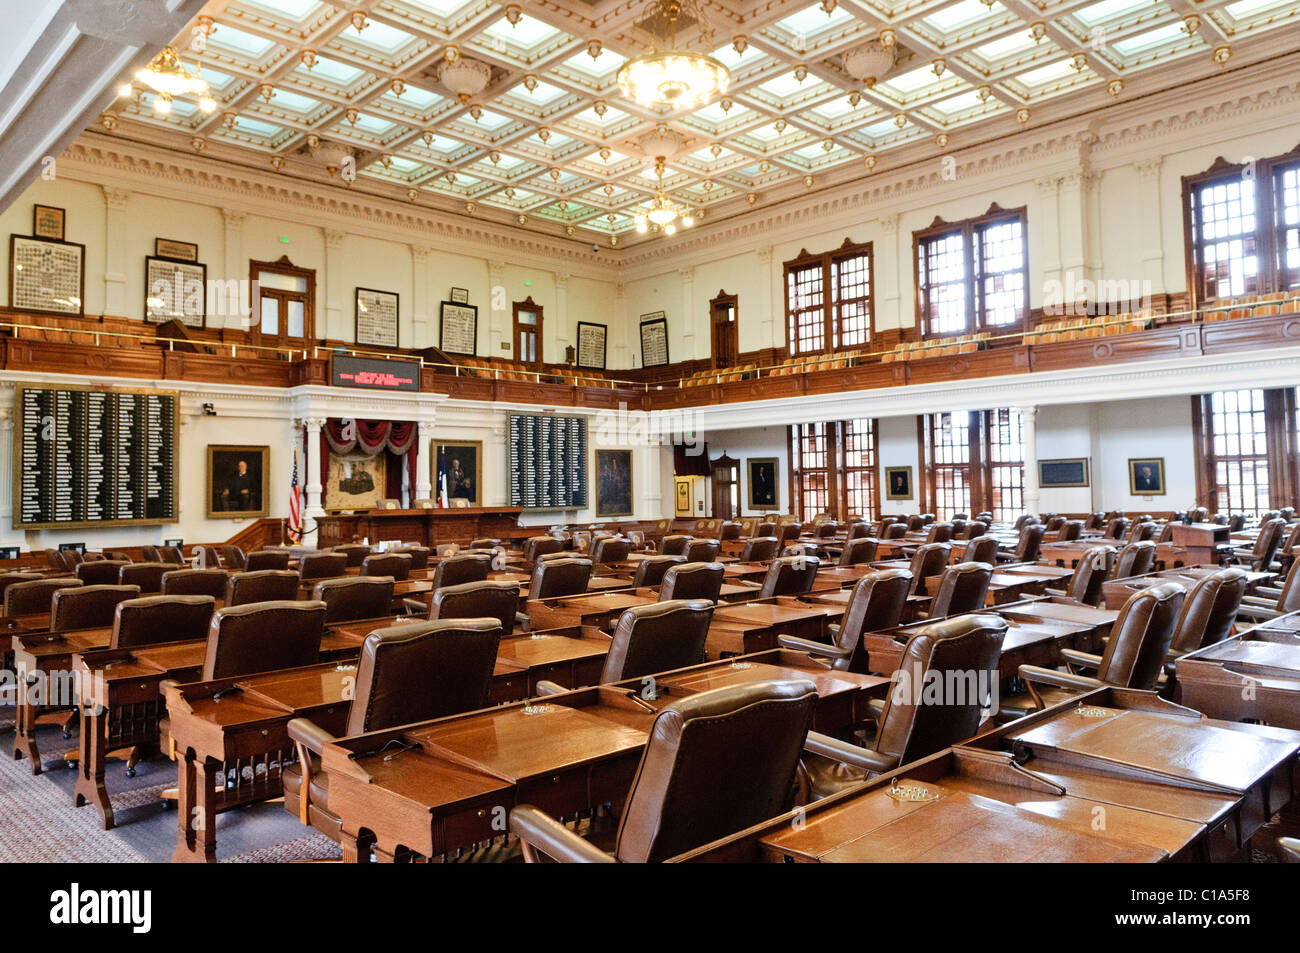 AUSTIN, Texas - The House of Representatives chamber in the Texas State Capitol in Austin, TX. The House has 150 members and a regular session adds up to 140 days a year, and there are no term limits for representatives. Stock Photo